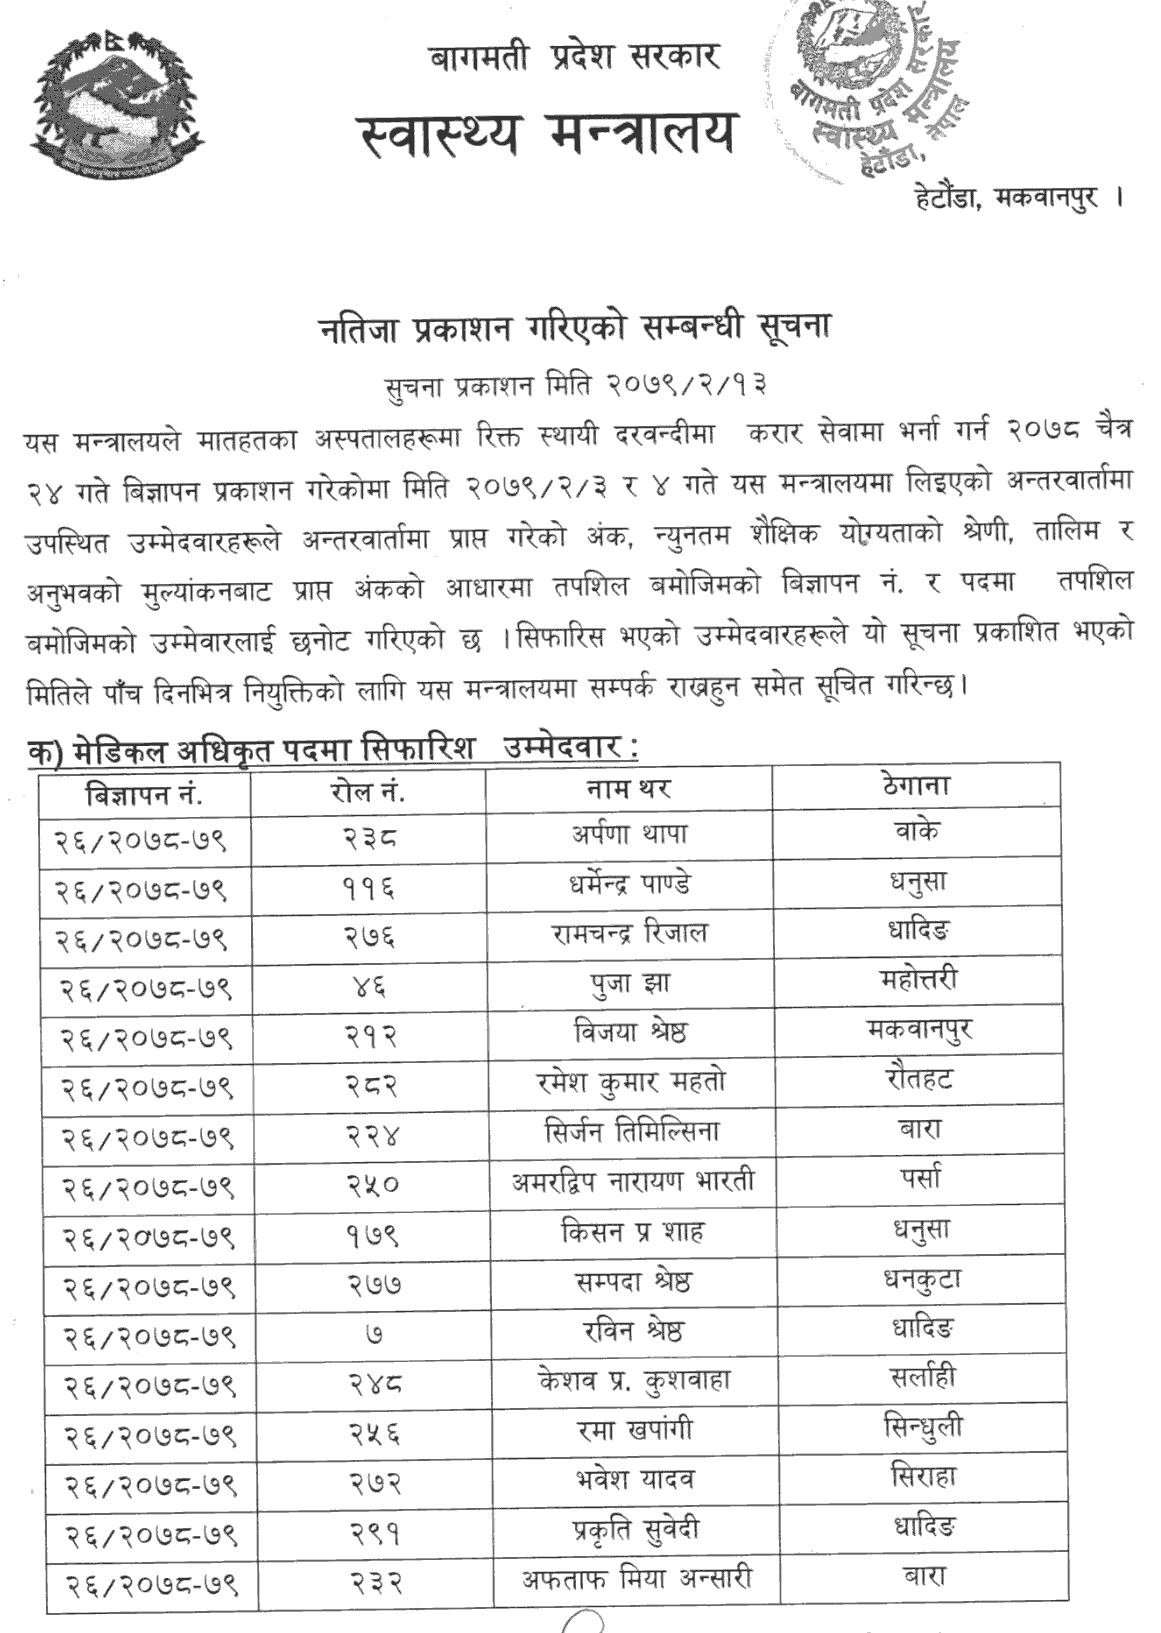 Ministry of Health Bagmati Pradesh Final Result of Medical Officer and Consultant